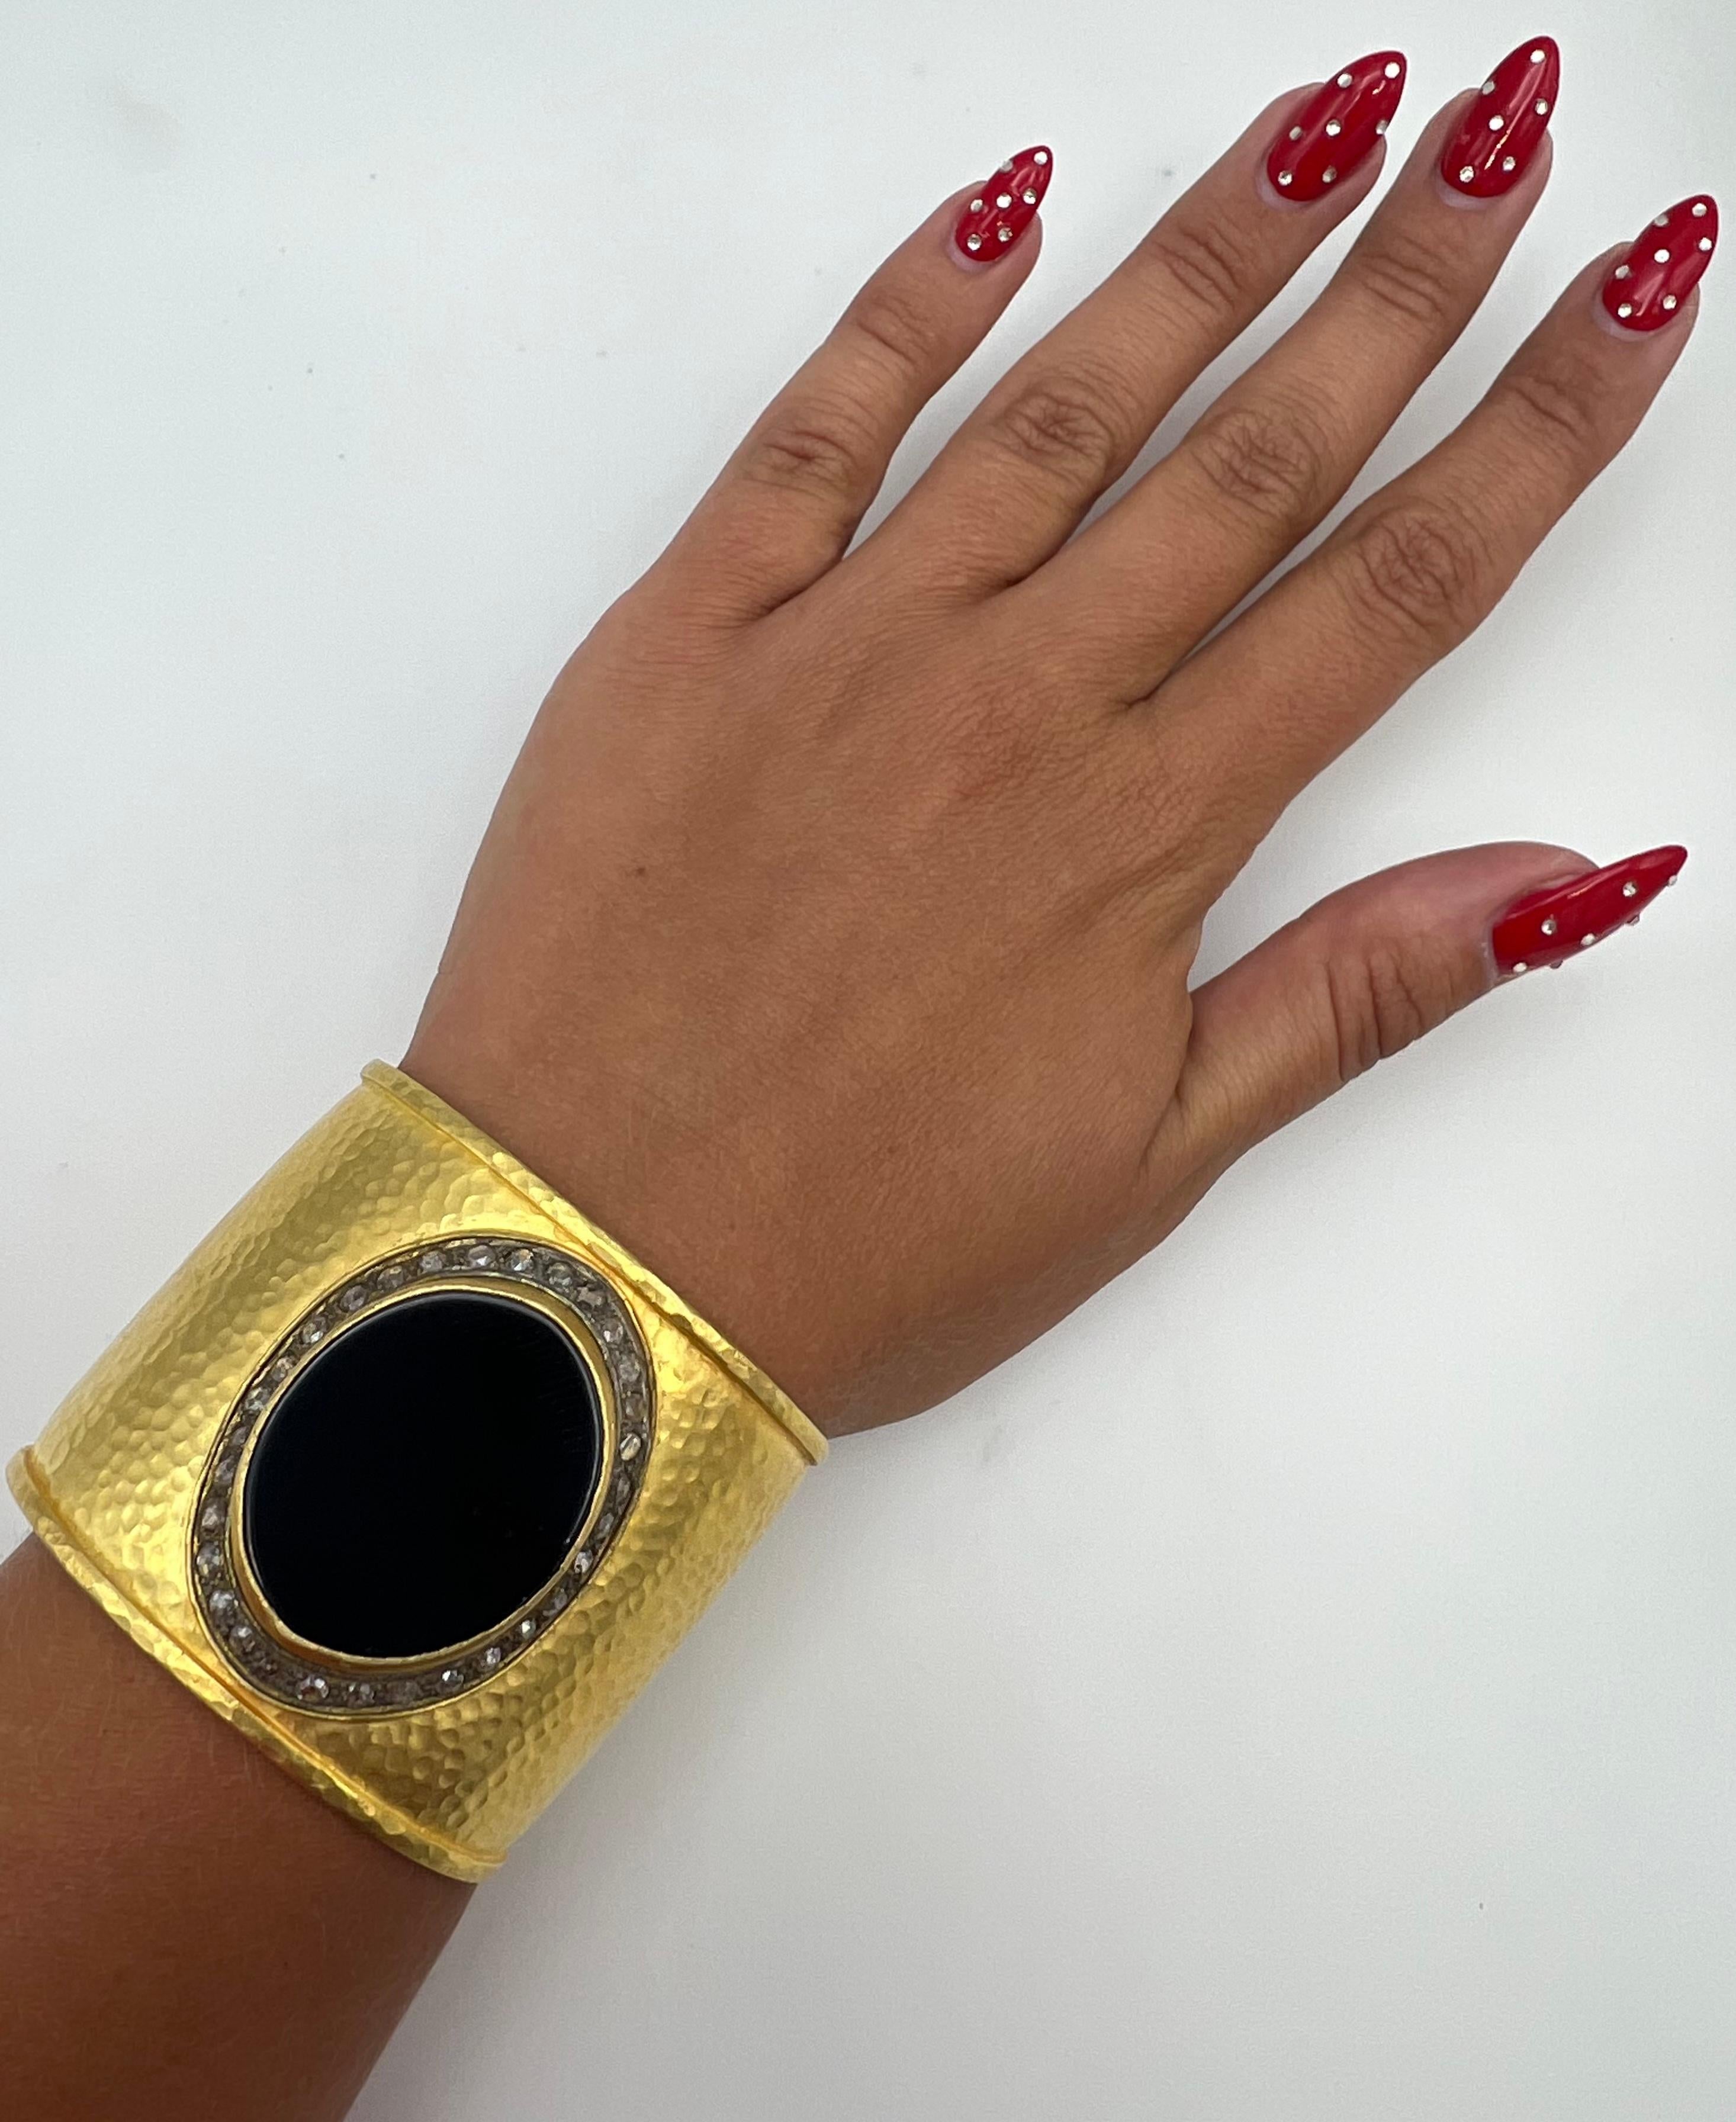 The bracelet features black oval onyx on the front, accented with rose cut diamonds around it and 18 karat yellow gold with hammered finish.
Total. Weight is 74.6 grams.
Measurments: 2 inches high and 6 inches inner circumference. 